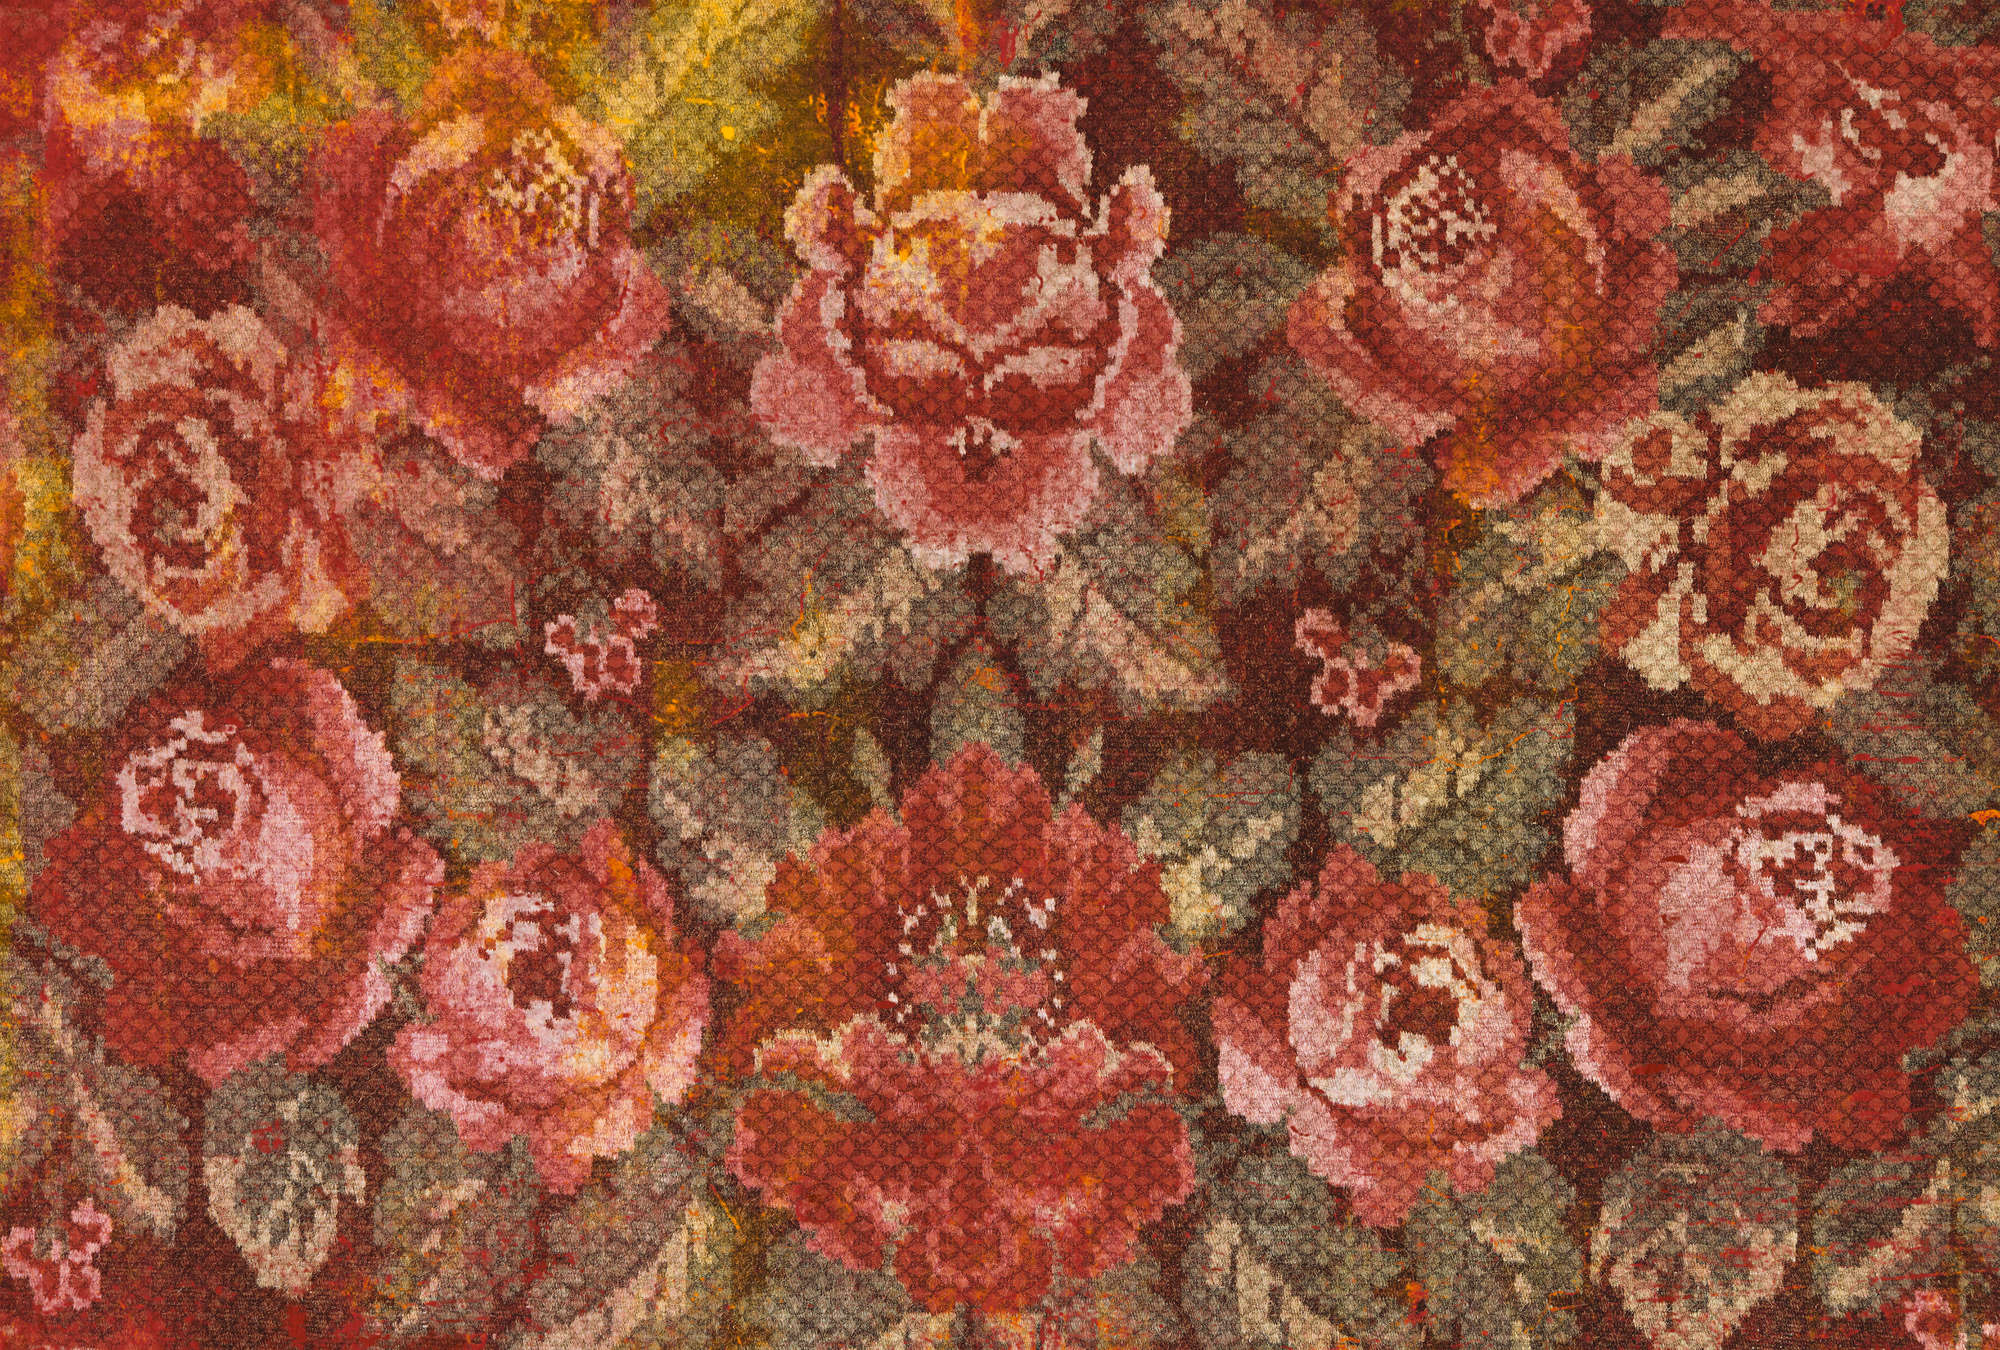             Roses mural folklore, embroidery patterns & vintage - pink, green, yellow
        